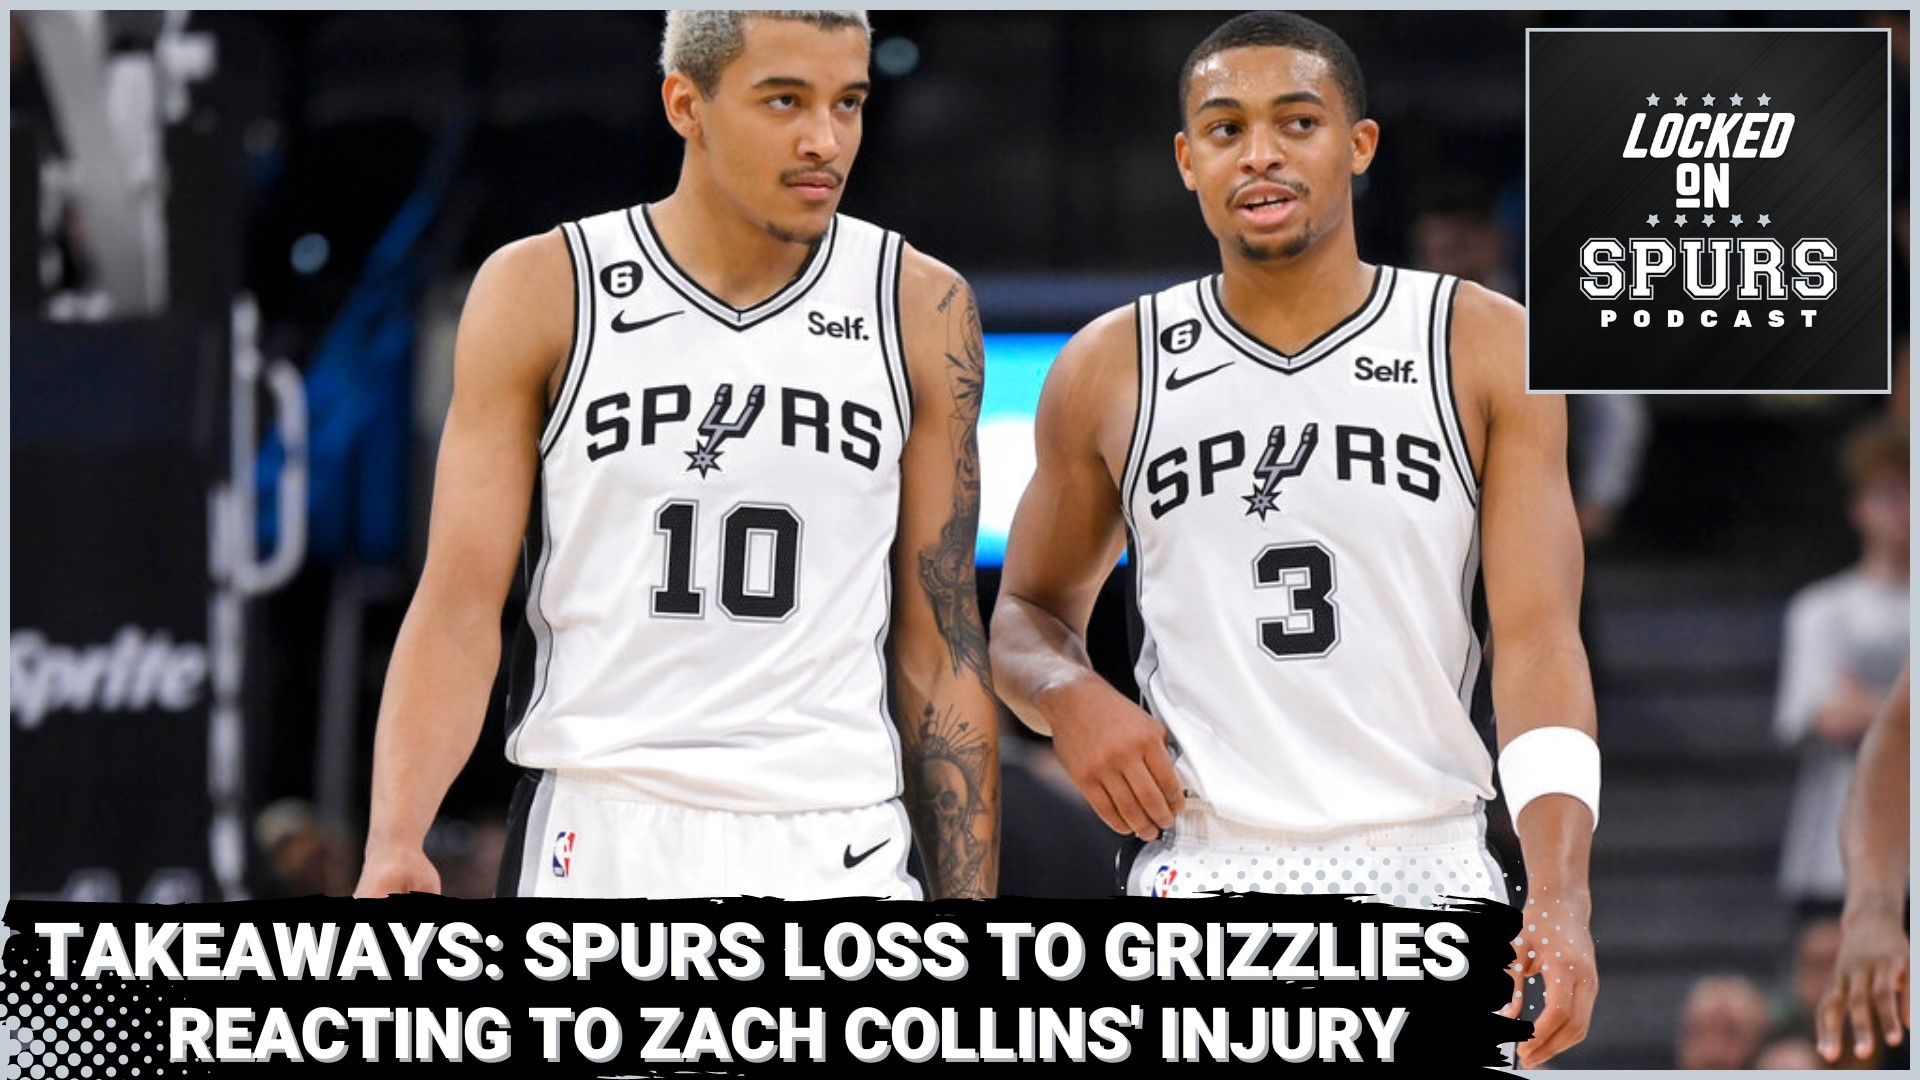 The Spurs lost a heartbreaker in overtime to the Grizzlies.